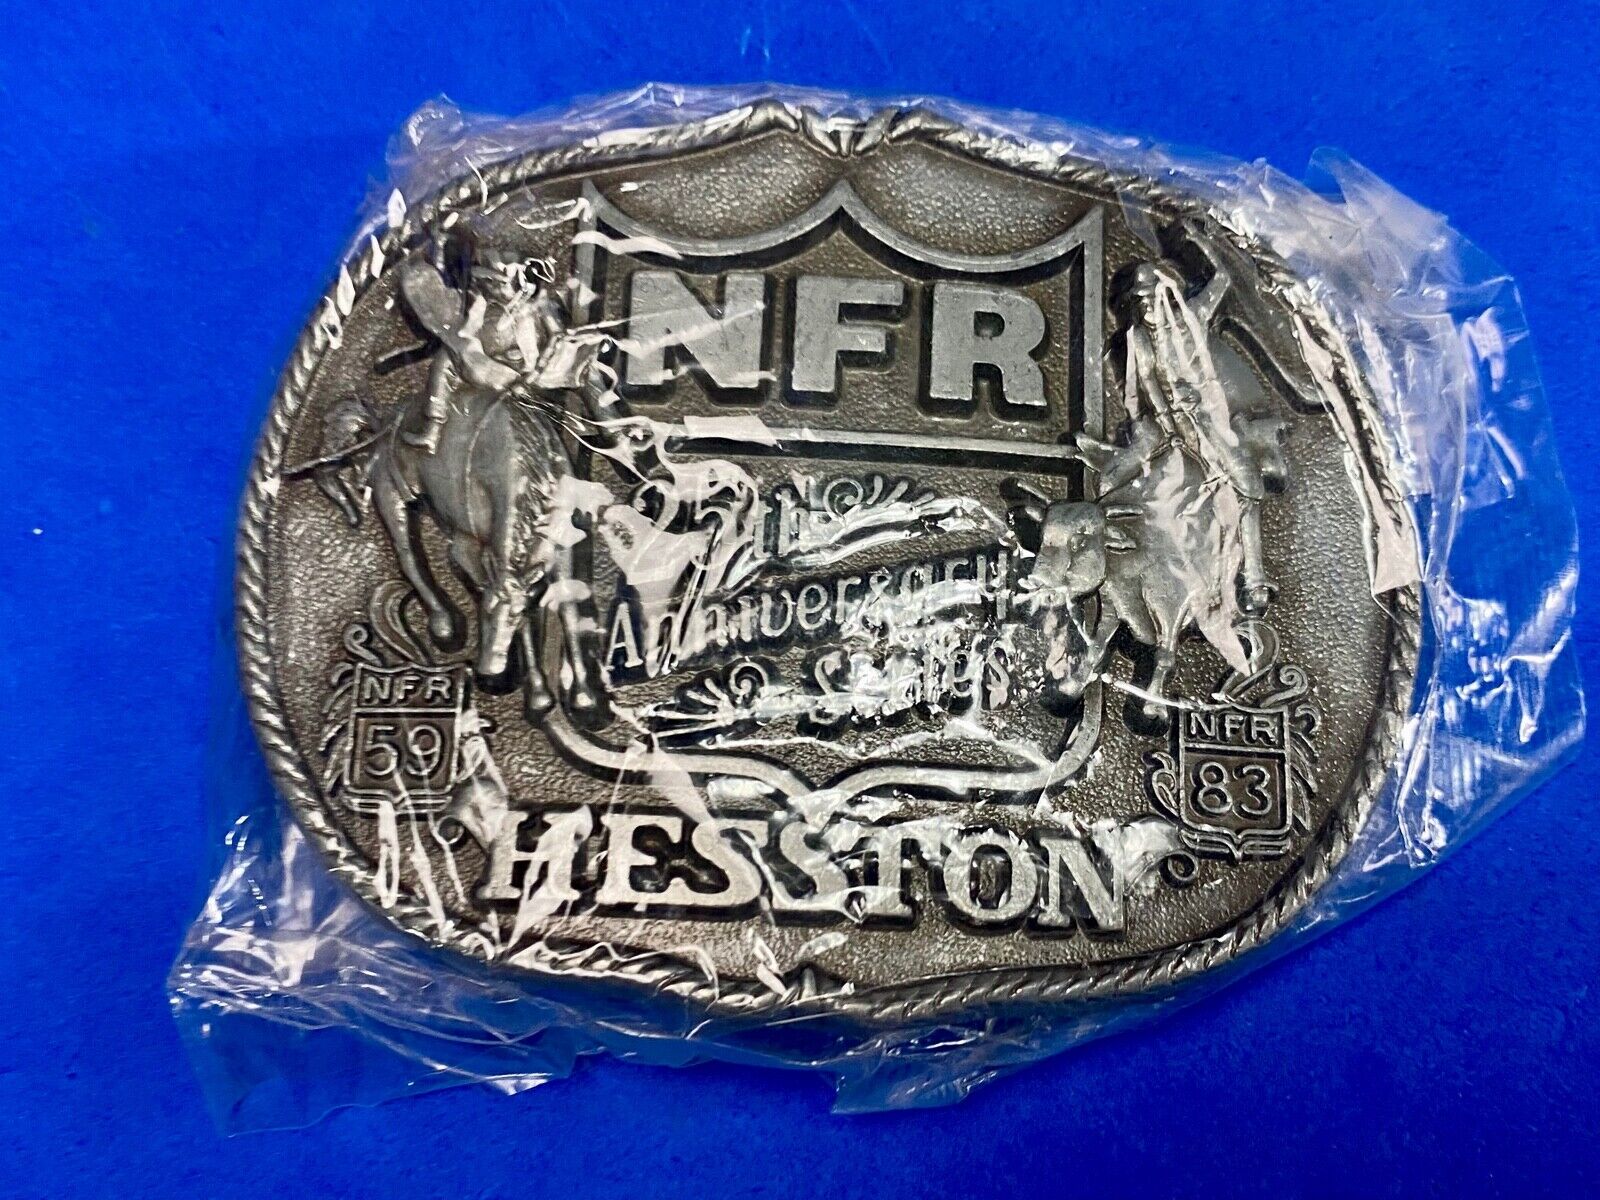 1983 NOS 25th Anniversary 1st edition national finals rodeo NFR belt buckle 